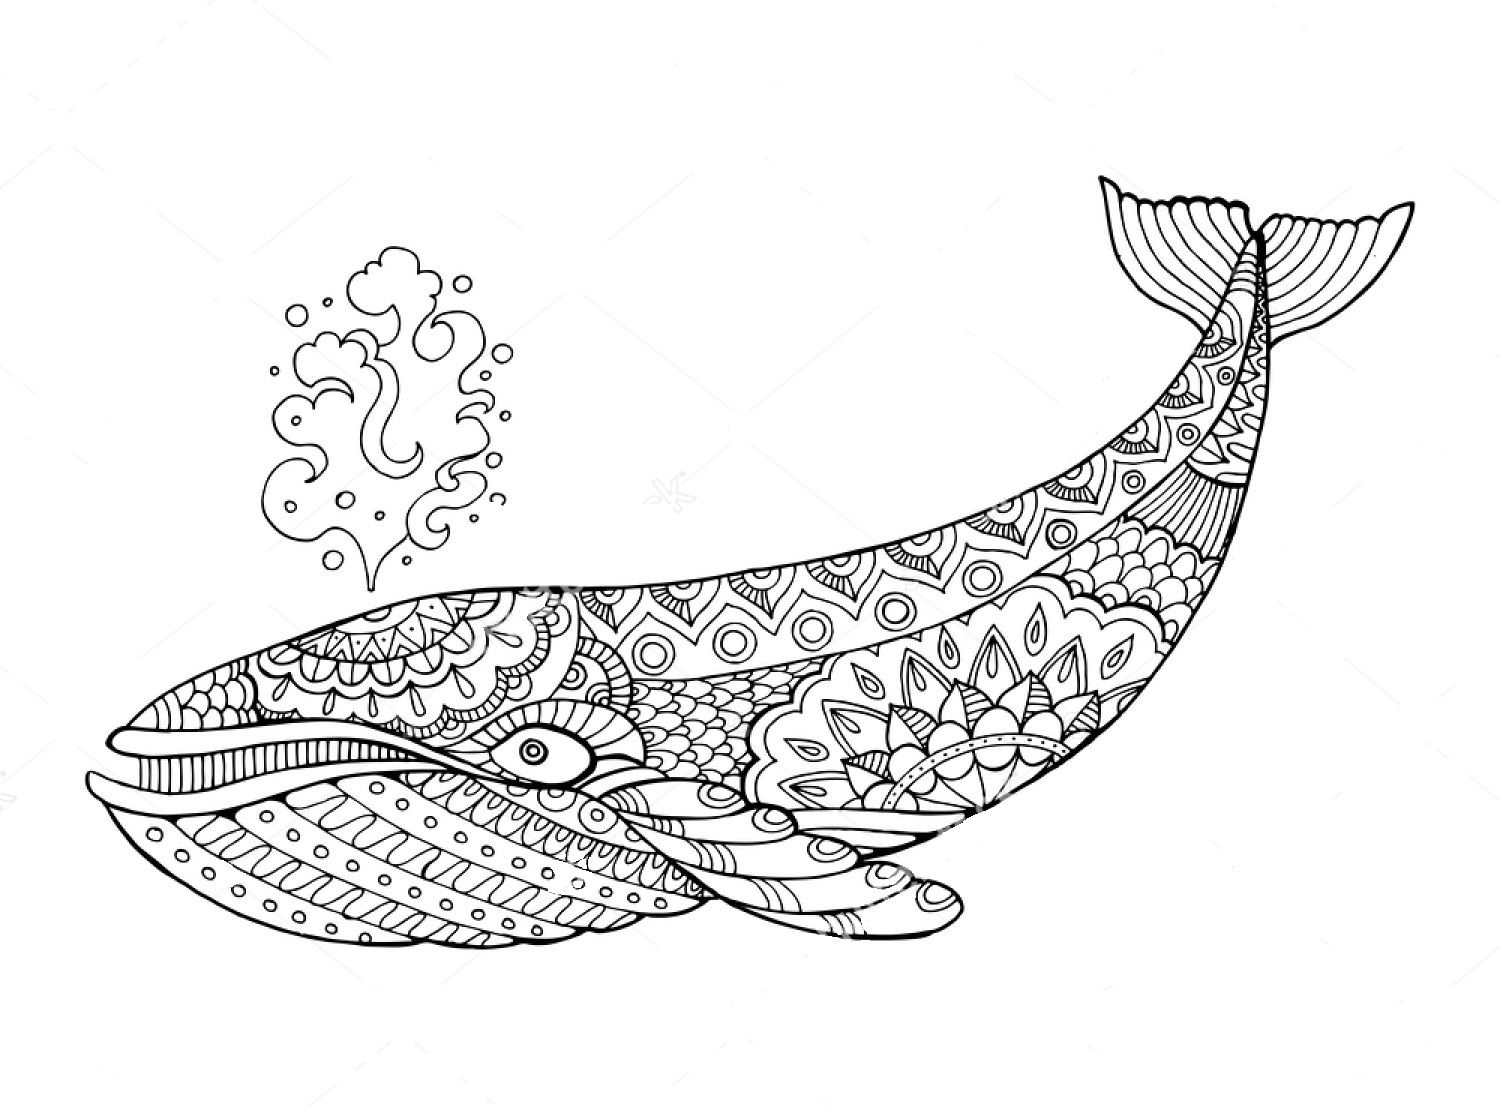 Whale zentangle coloring page whale coloring pages animal coloring books animal coloring pages